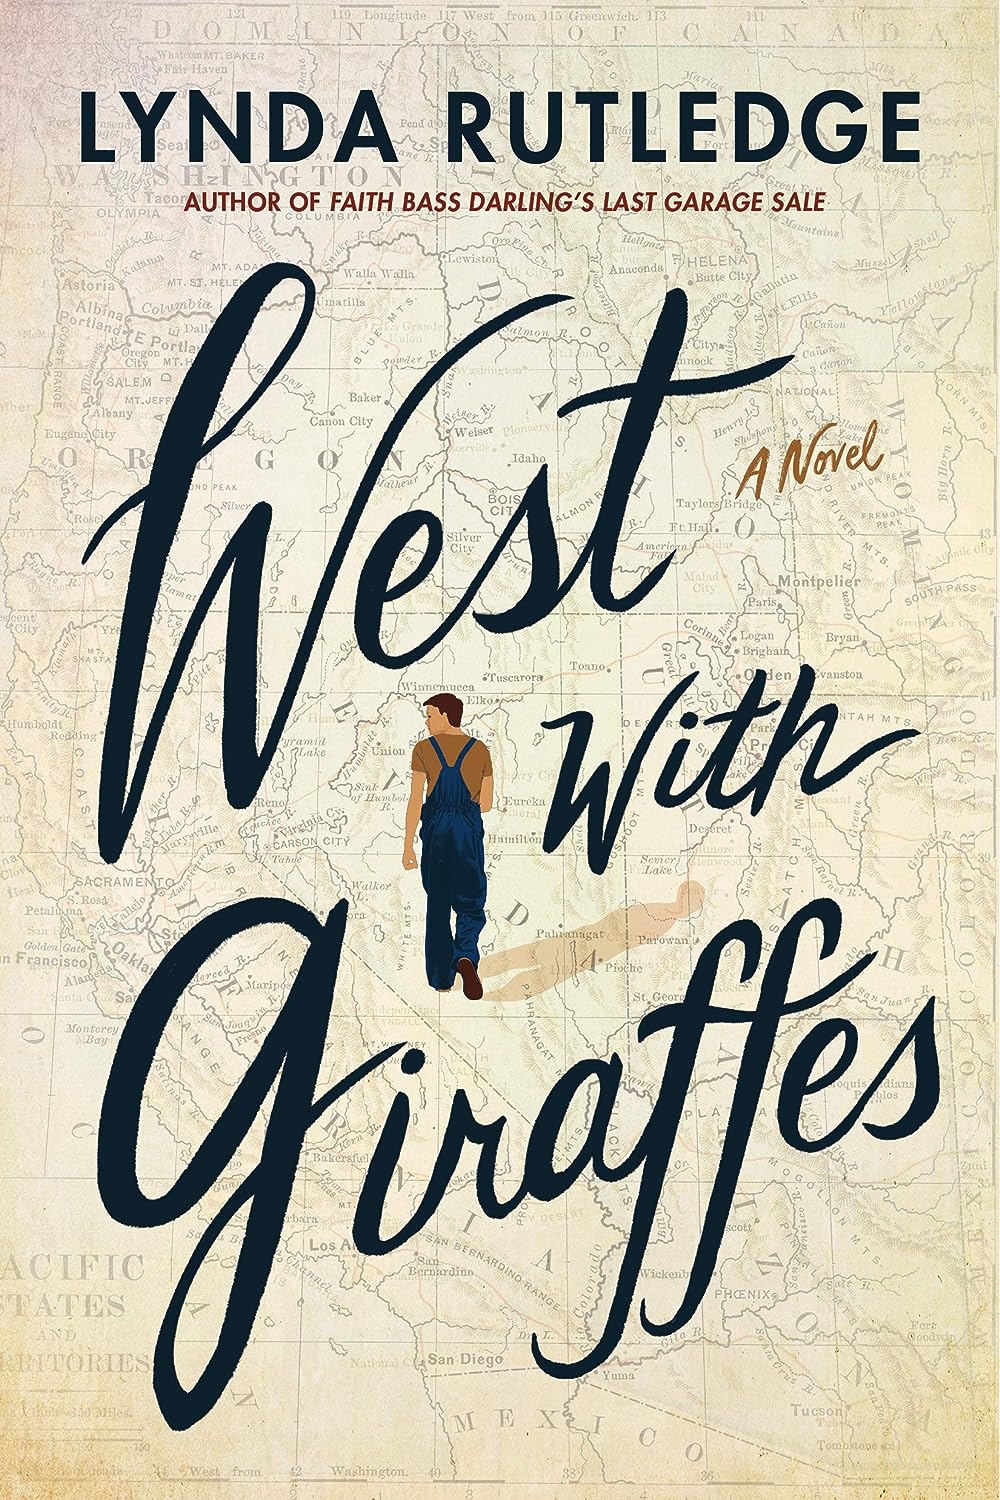 Book cover: west with giraffes a novel by lynda rutledge. Features an illustrated man in overalls walking over an illustrated map. The title of the book is written in cursive.